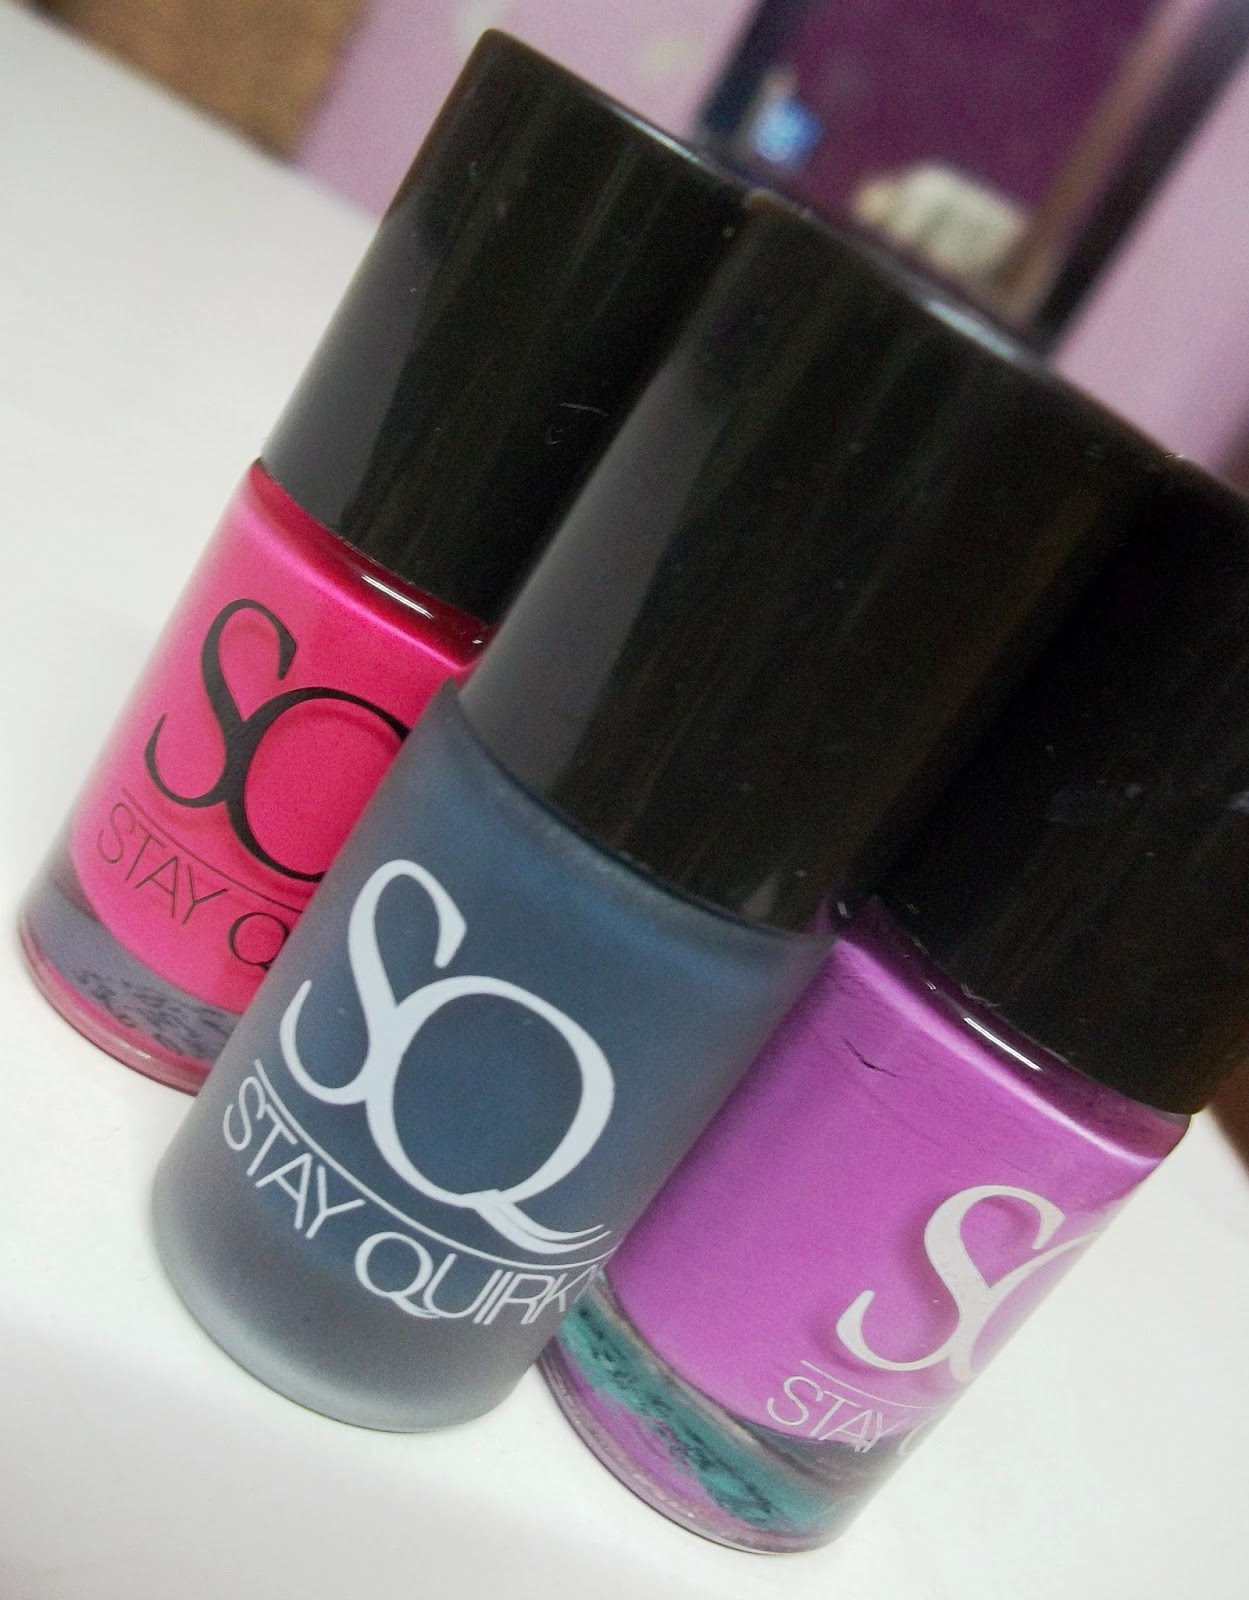 Stay Quirky Nail Polish Review